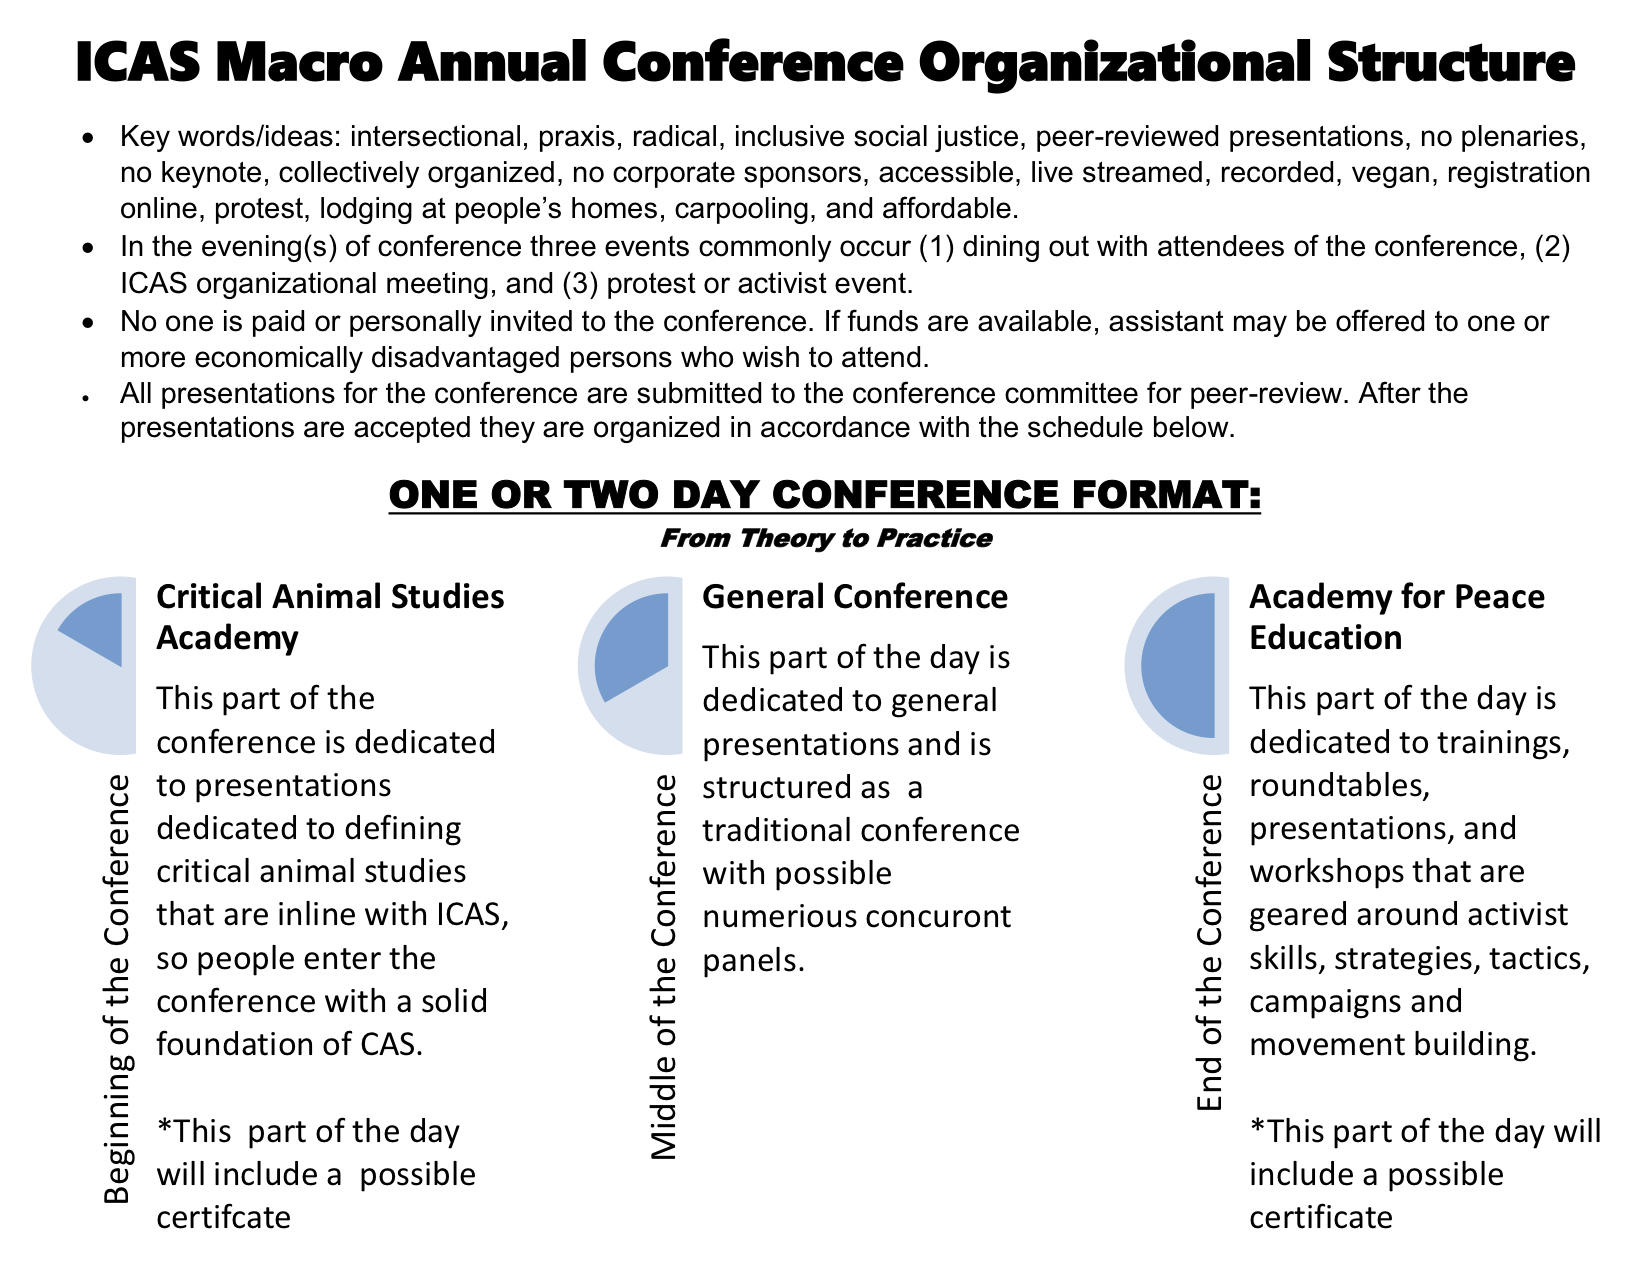 ICAS Organizational Structure for a 1 or 2 Day Conference | Institute for  Critical Animal Studies (ICAS)